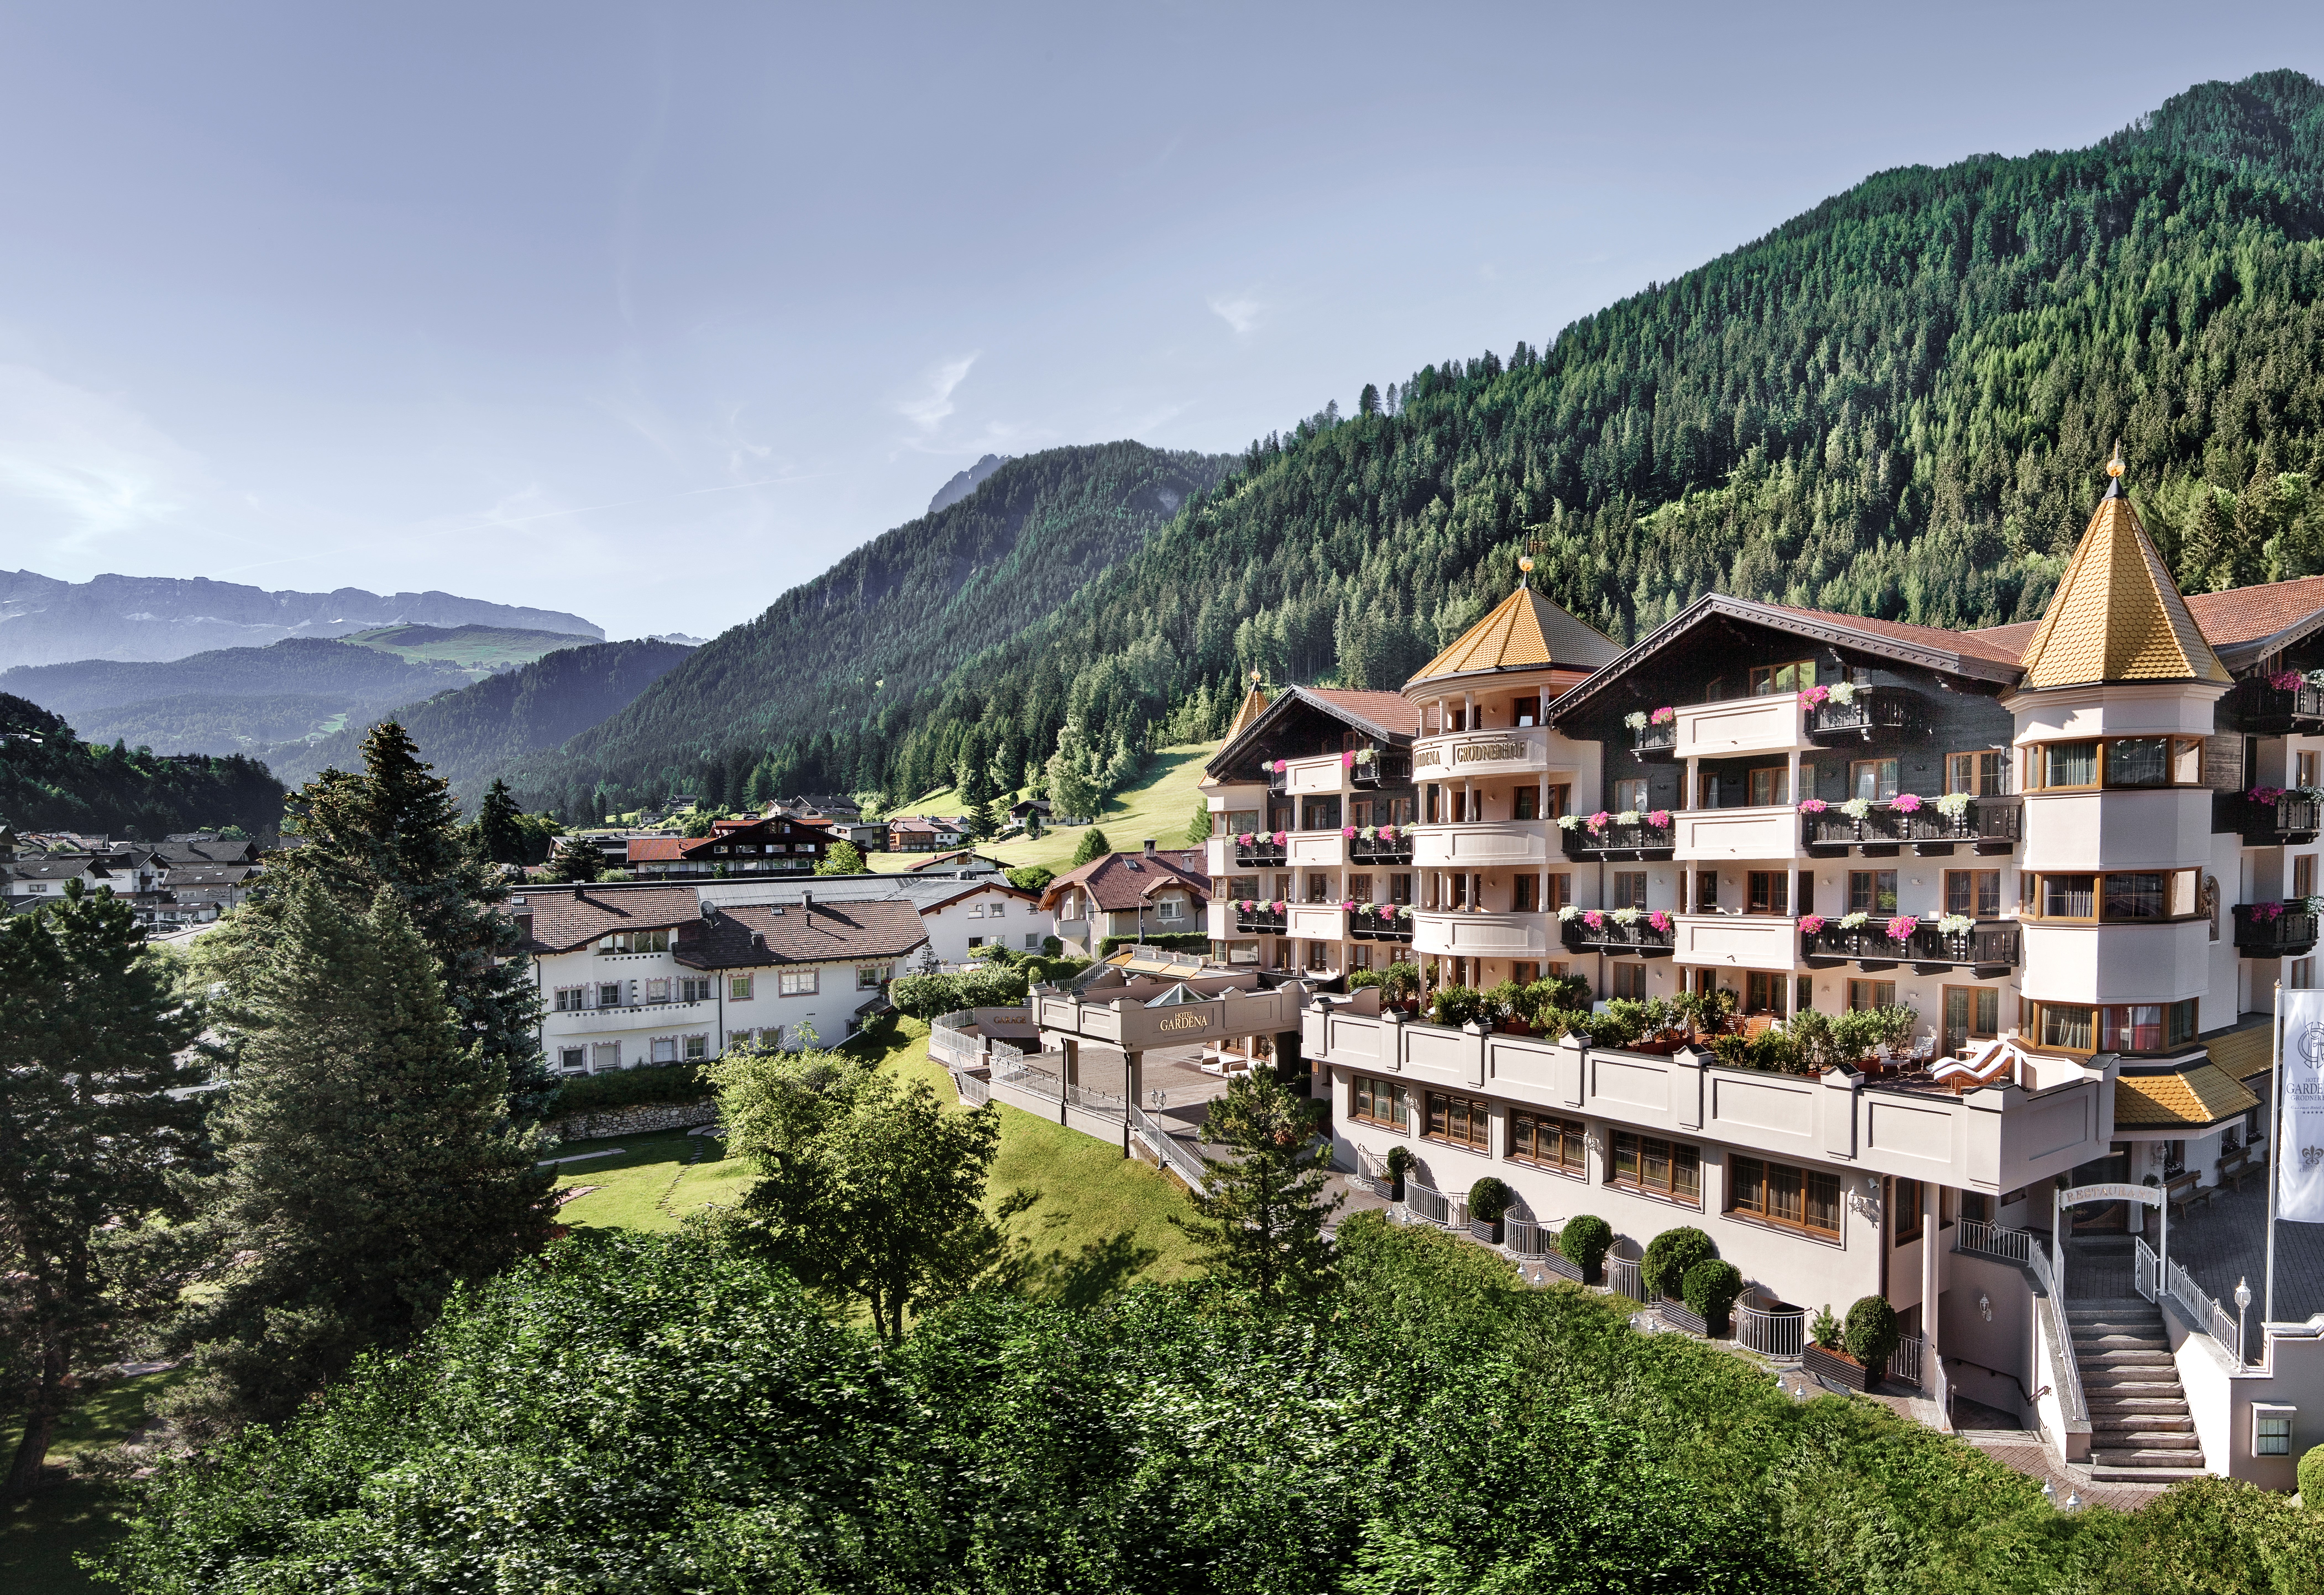 The five star family-run hotel in Ortisei is becoming popular with international visitors